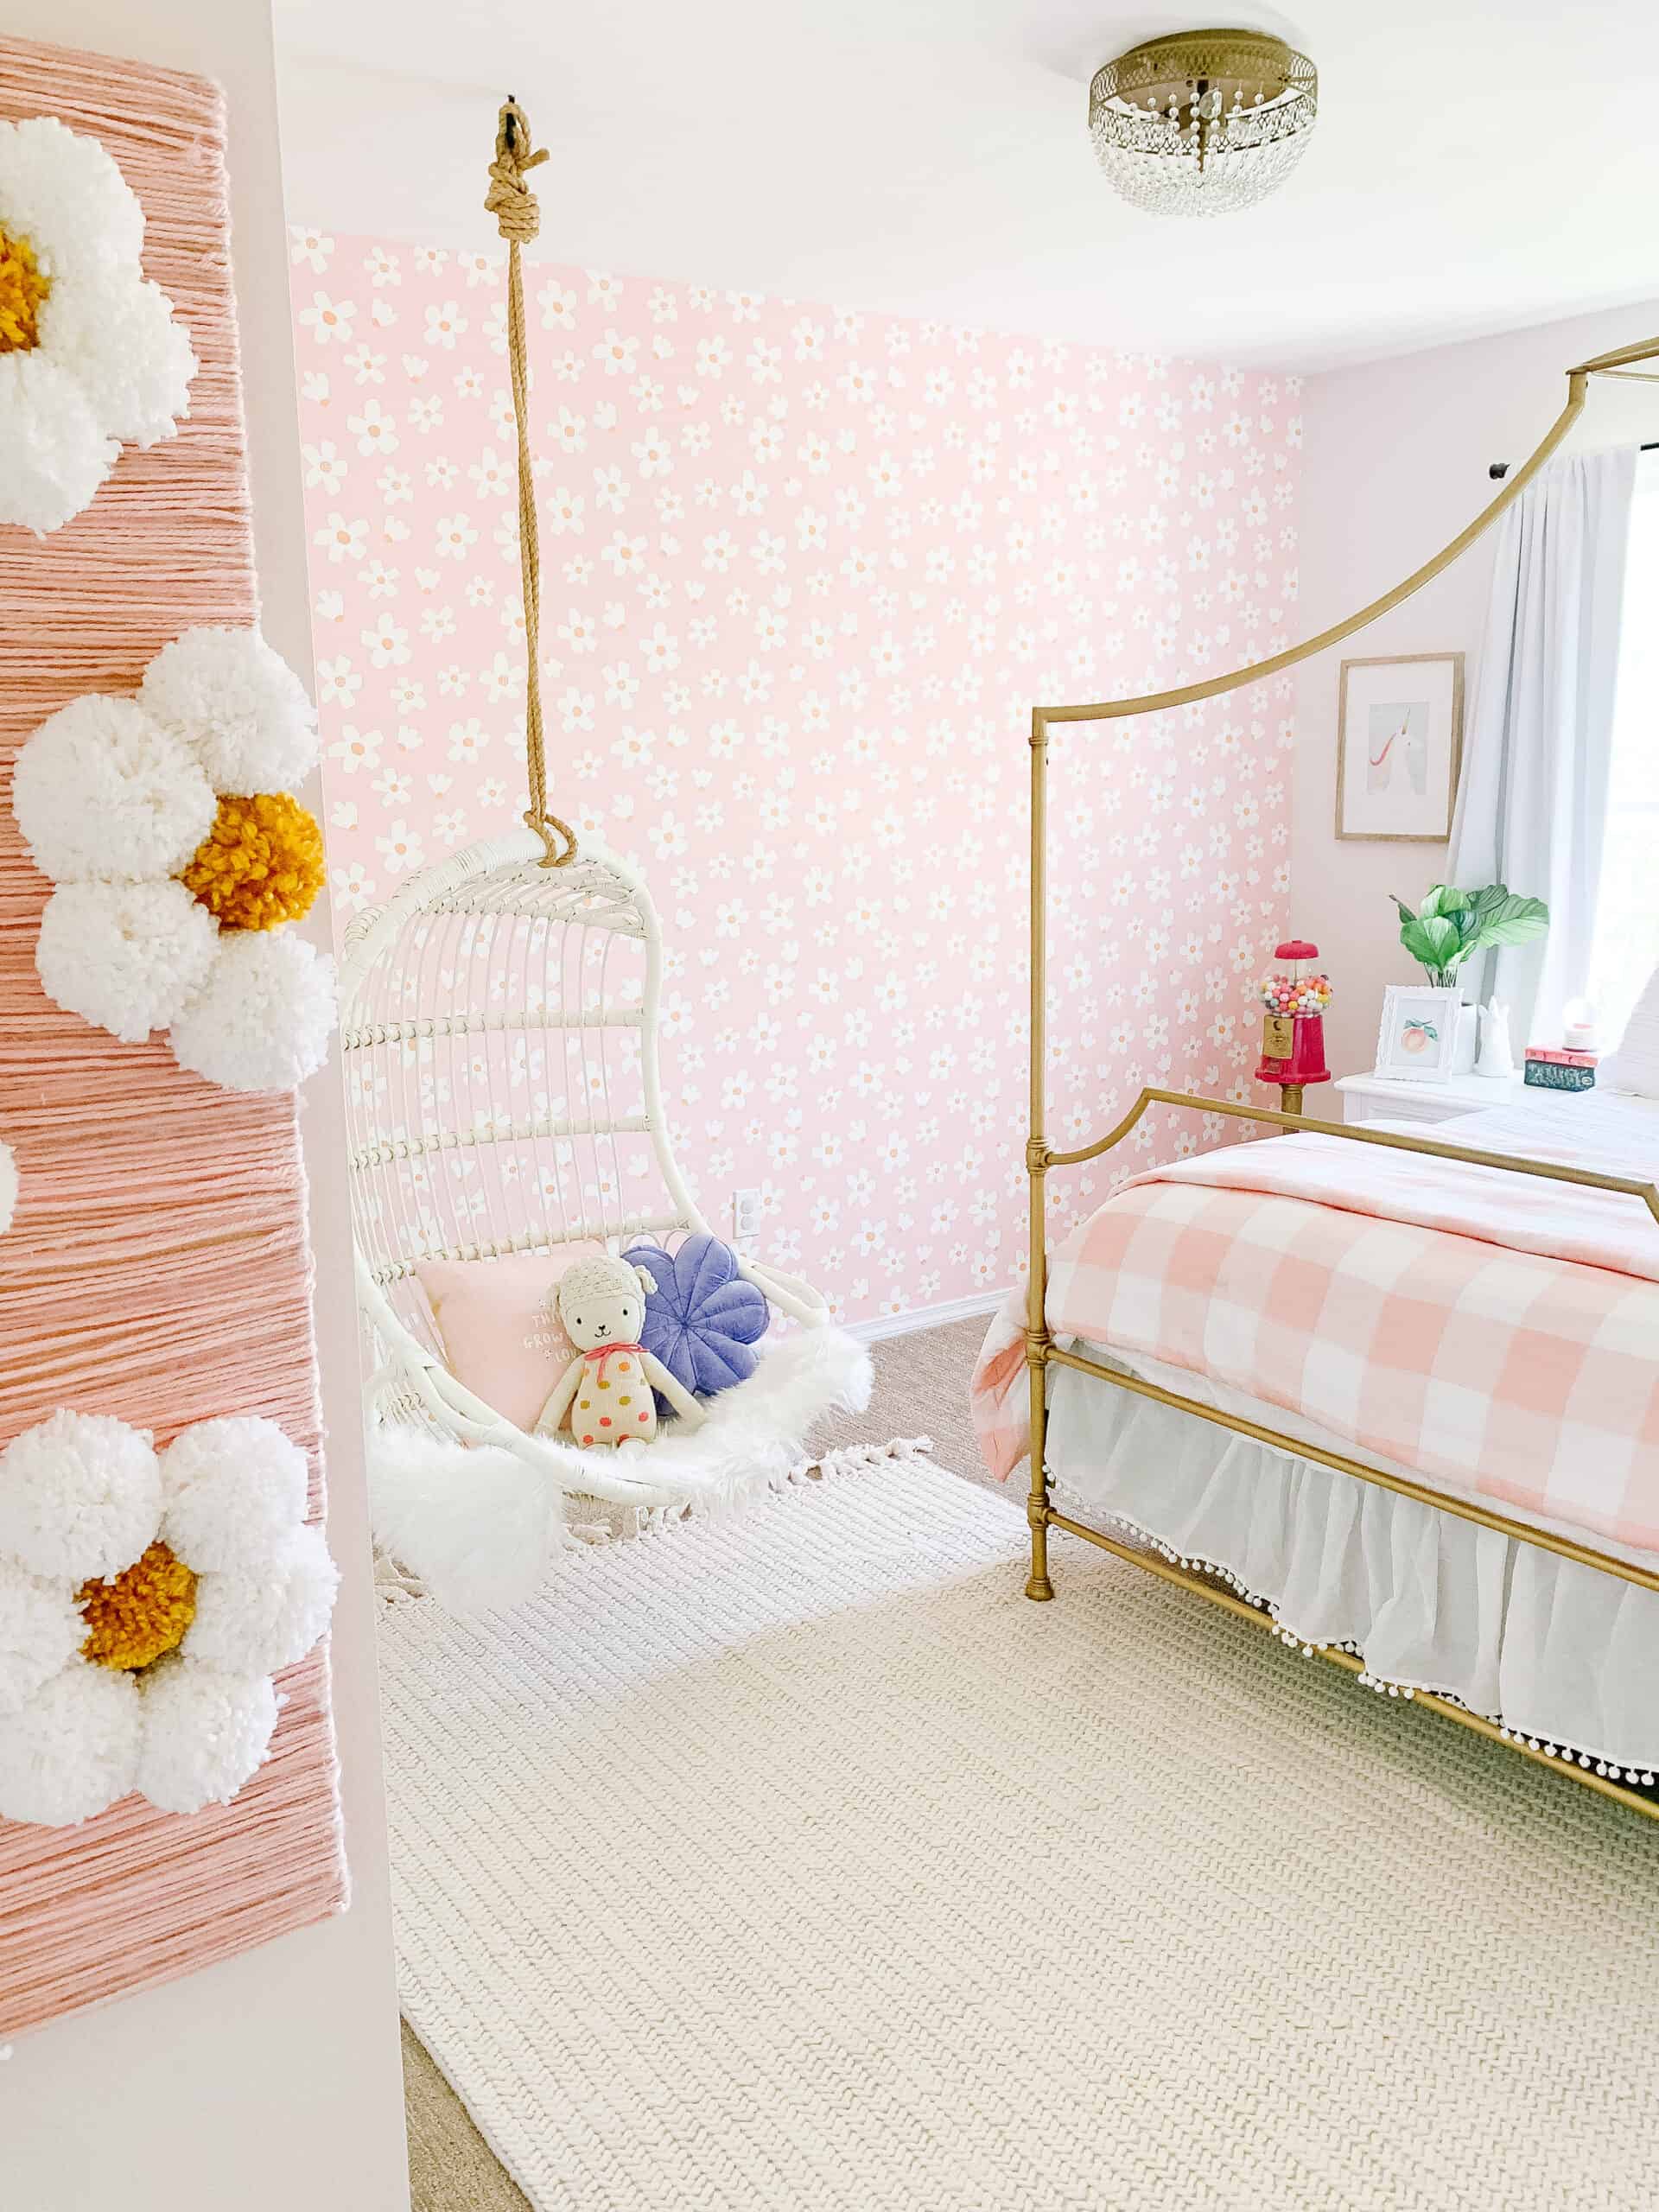 Little girls room with daisy wallpaper